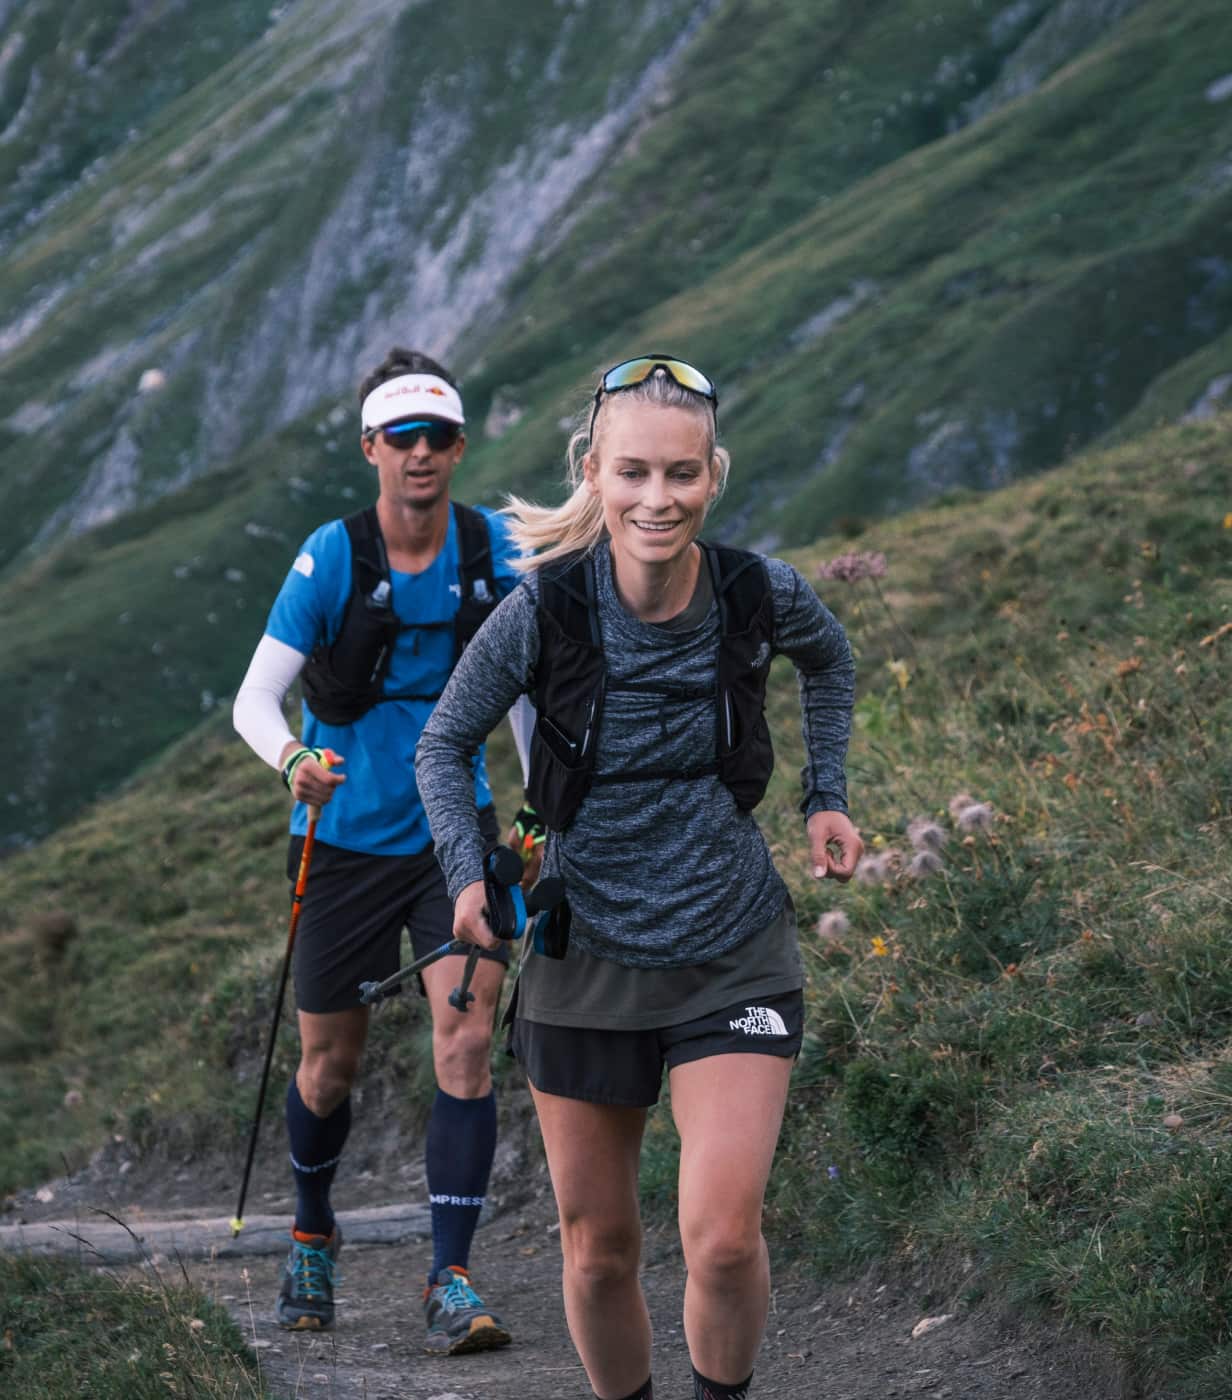 Harmony and Dylan Bowman running in the mountains at UTMB ultra trail running race.